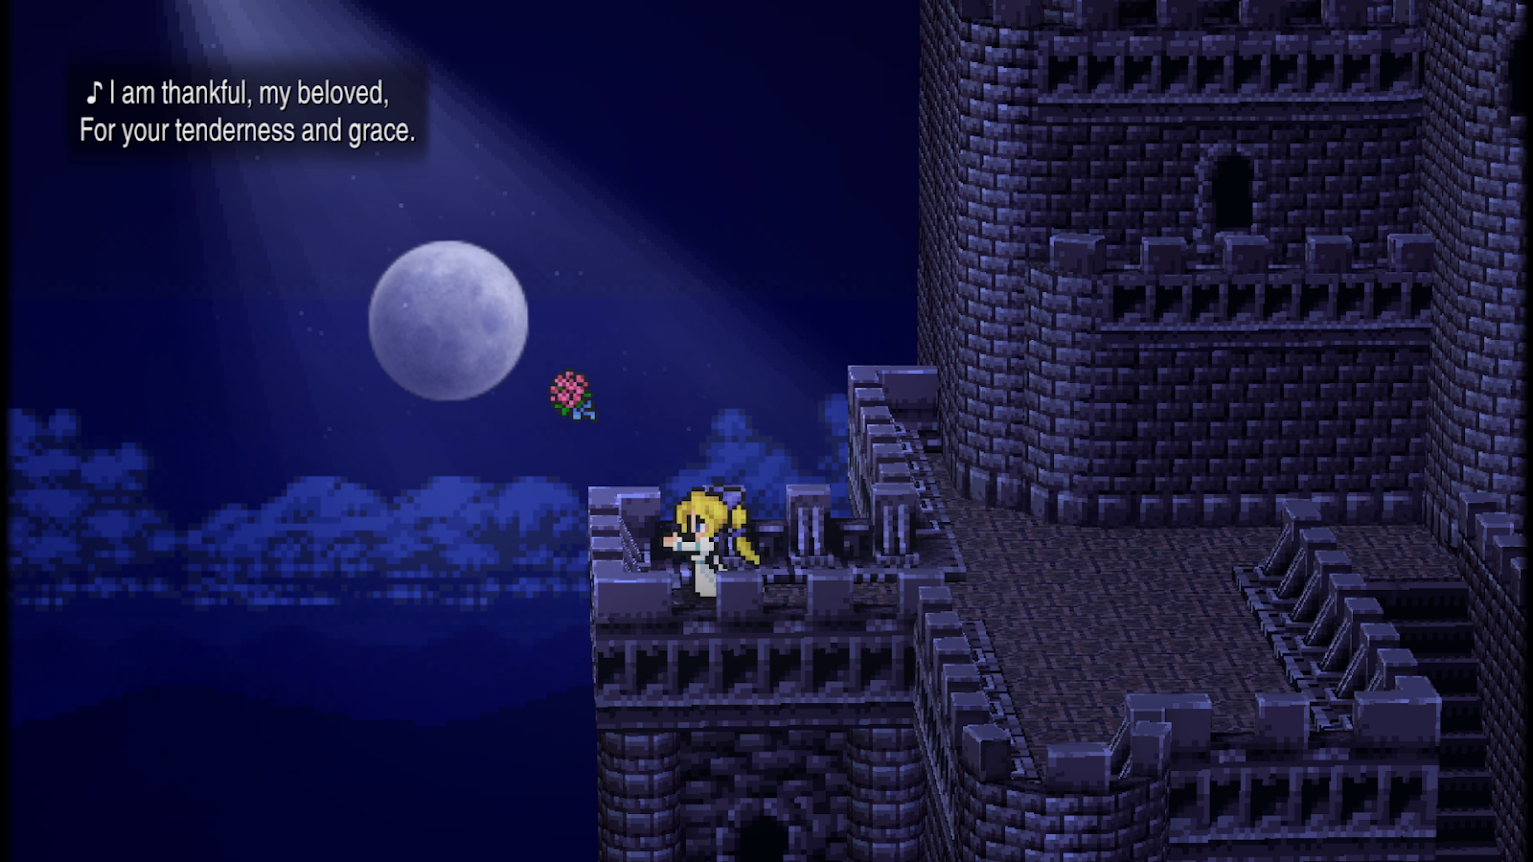 Final Fantasy VI makes a triumphant return to Android, but it’s far from perfect